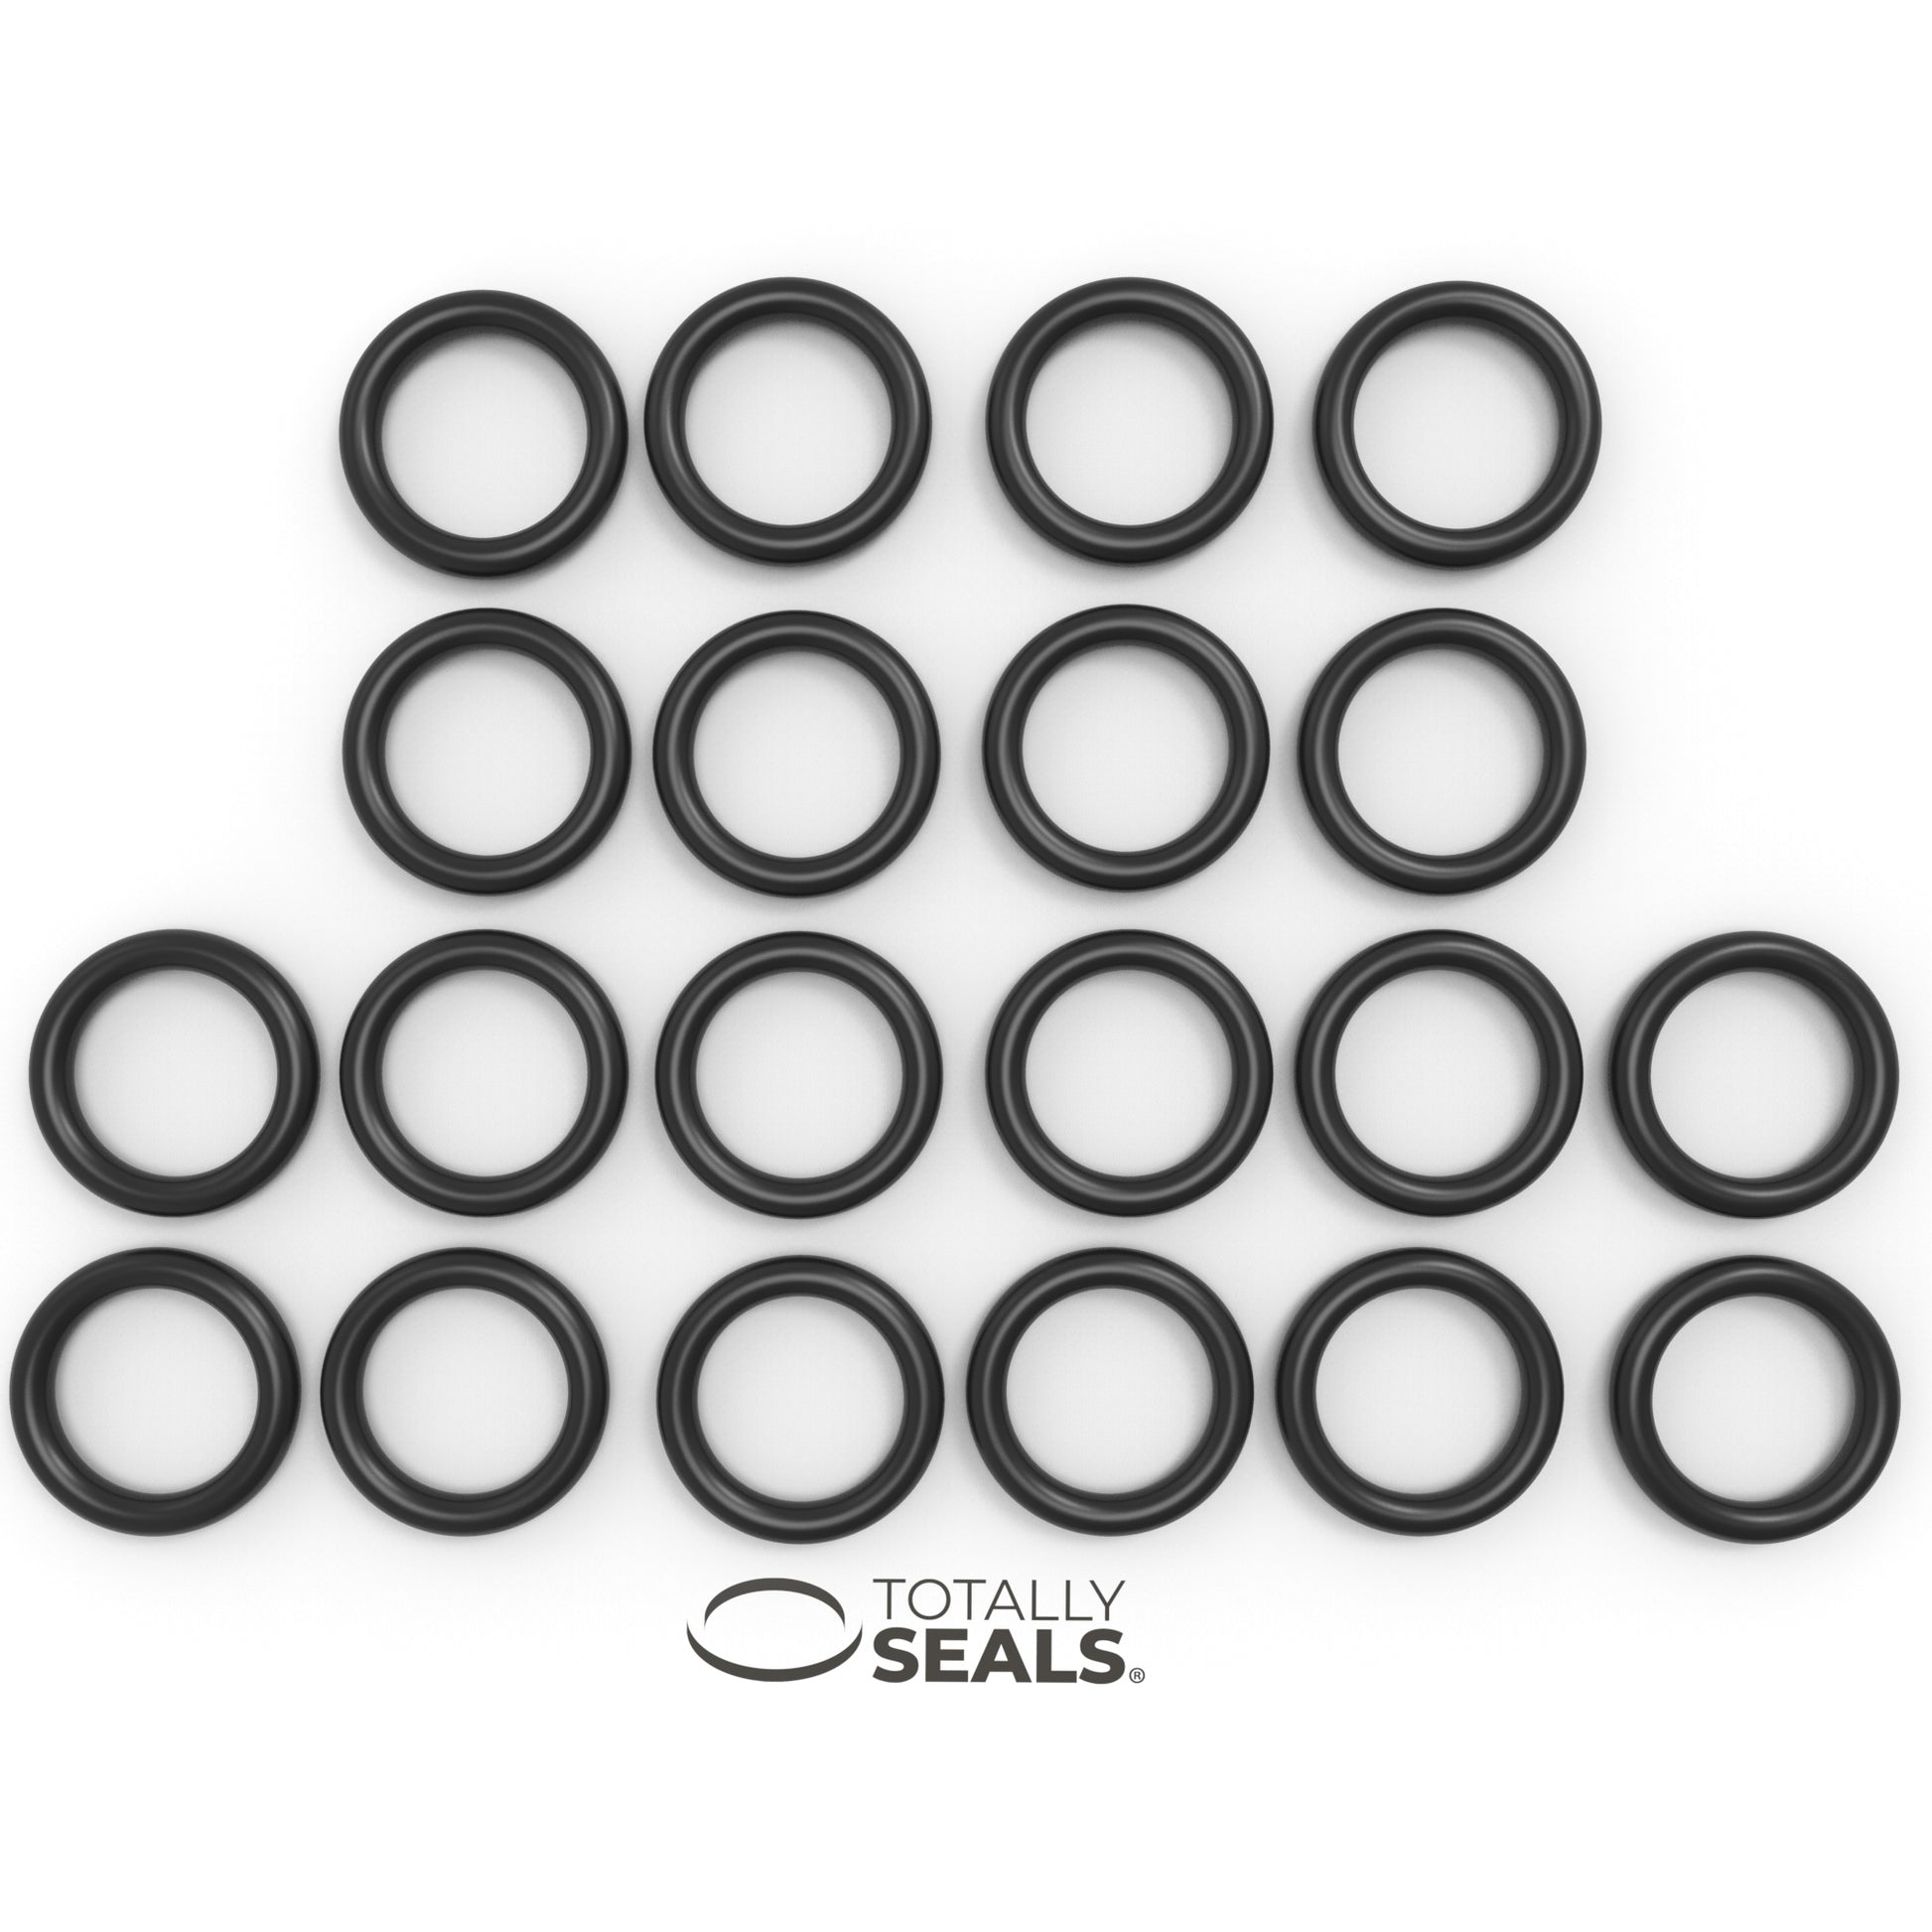 65mm x 5mm (75mm OD) Nitrile O-Rings - Totally Seals®